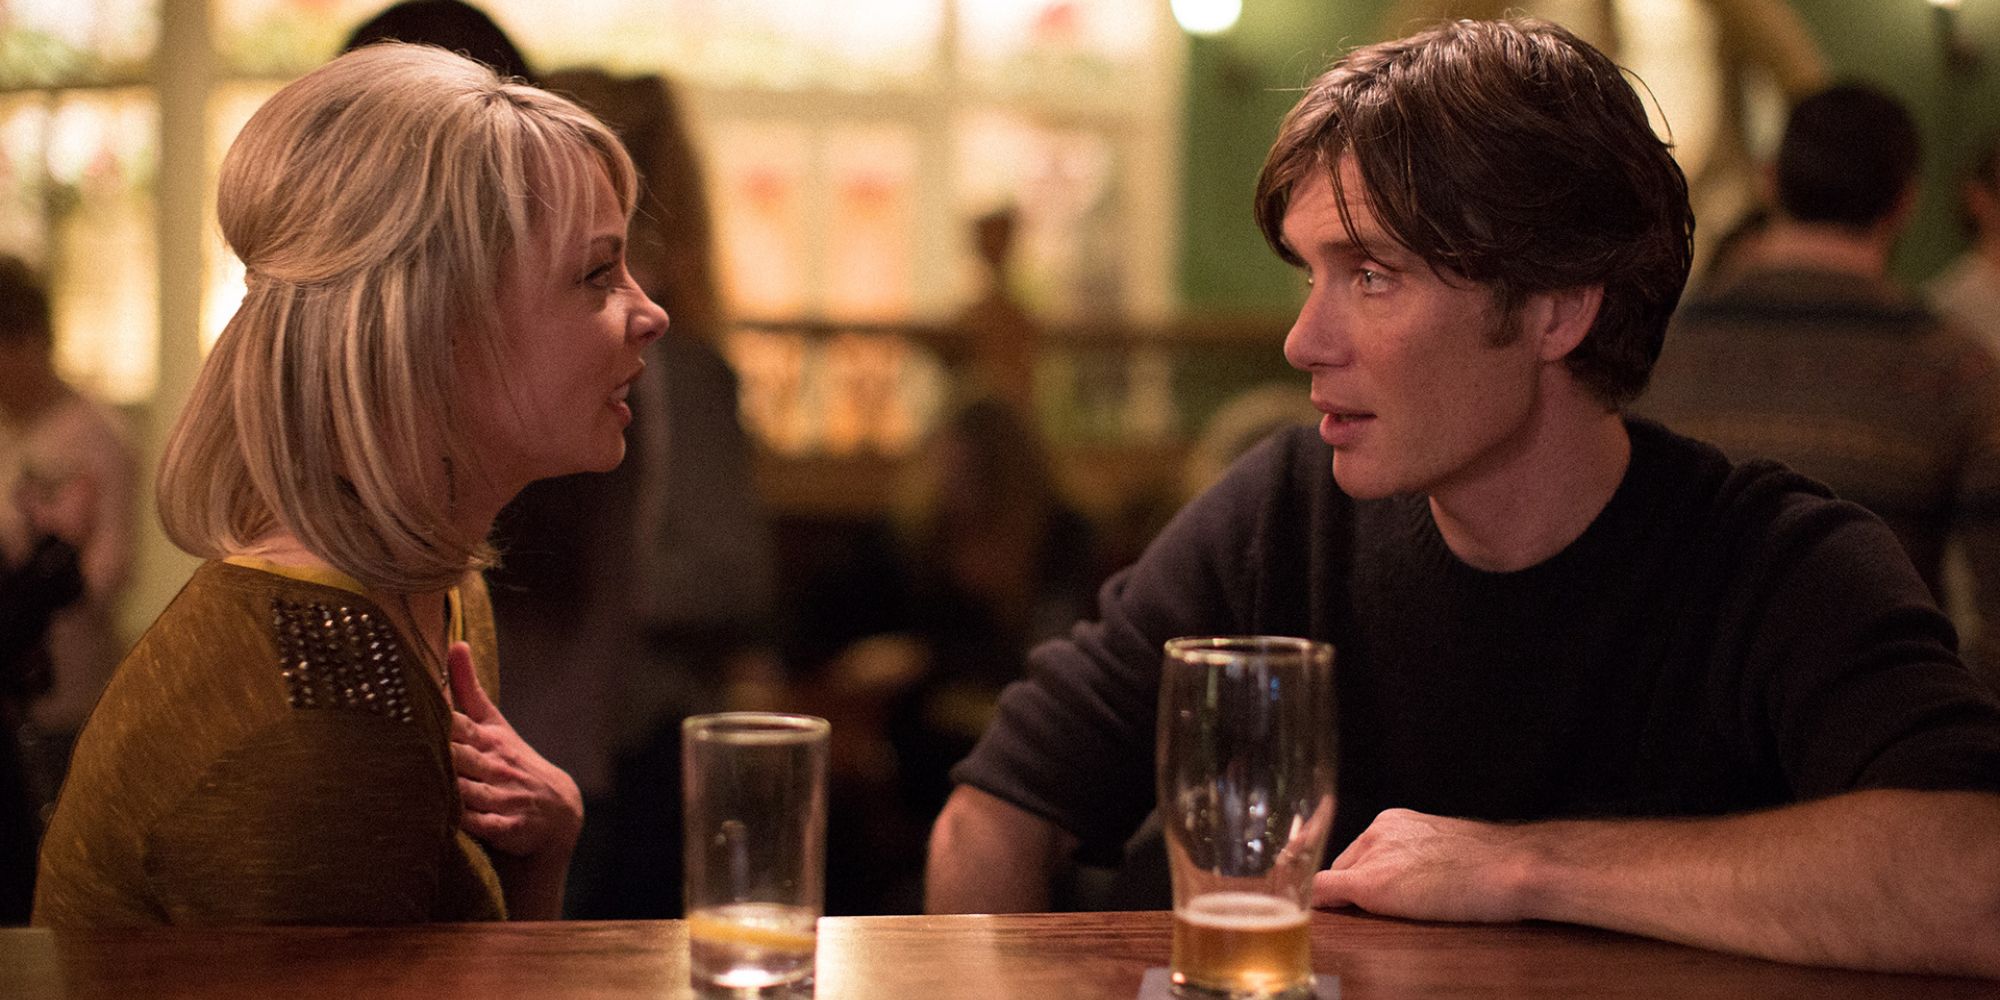 Lydia McGuinness and Cillian Murphy in The Delinquent Season (1)